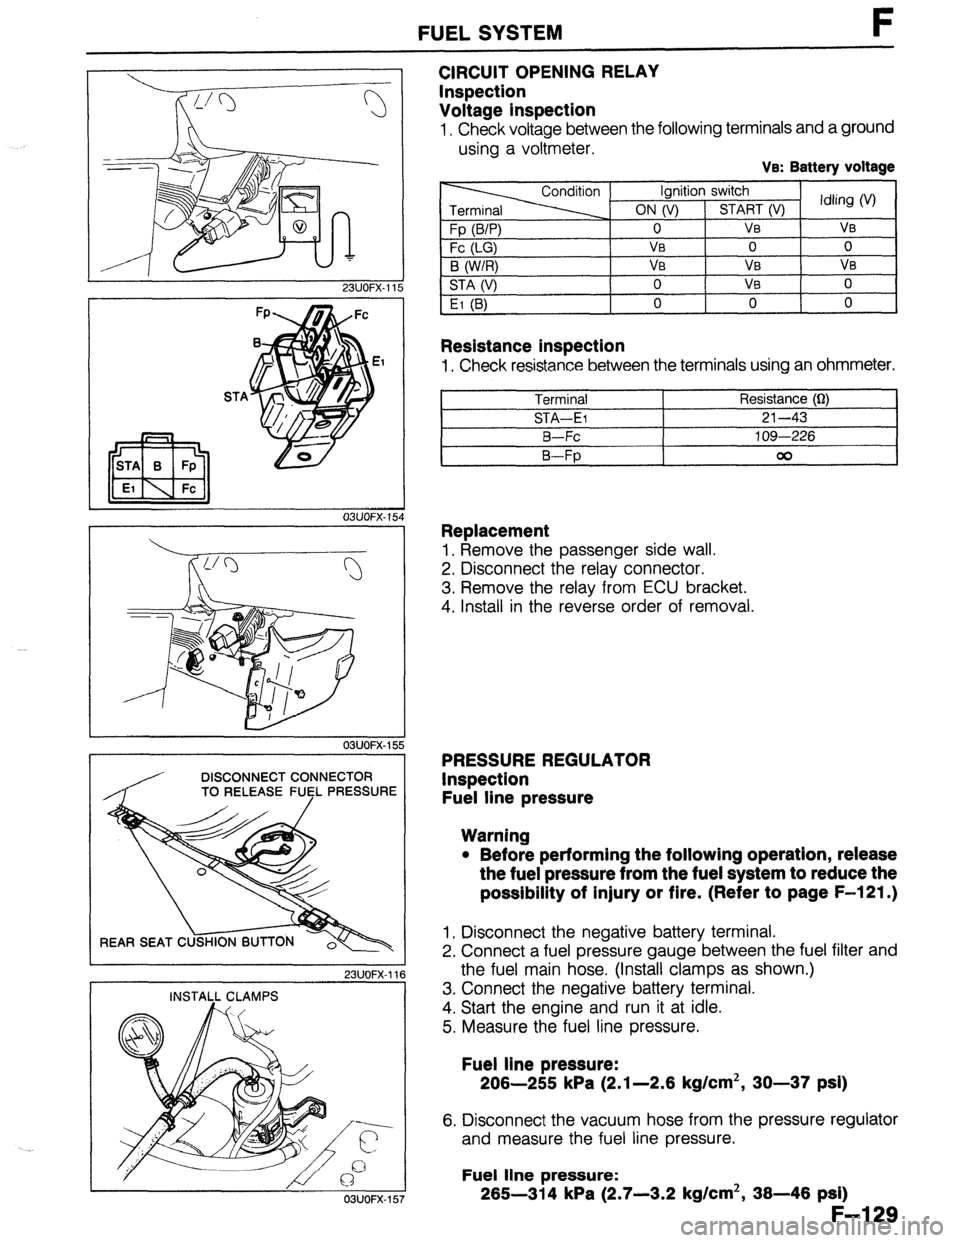 MAZDA 323 1989  Factory Repair Manual FUEL SYSTEM F 
STA 
OBUOFX- 15 
03UOFX-15 
DISCONNECT CONNECTOR 
TO RELEASE FUfL PRESSURE 
REAR SEAT C 
23UOFX-11 
INSTALL CLAMPS 
CIRCUIT OPENING RELAY 
Inspection 
Voltage inspection 
I, Check volta